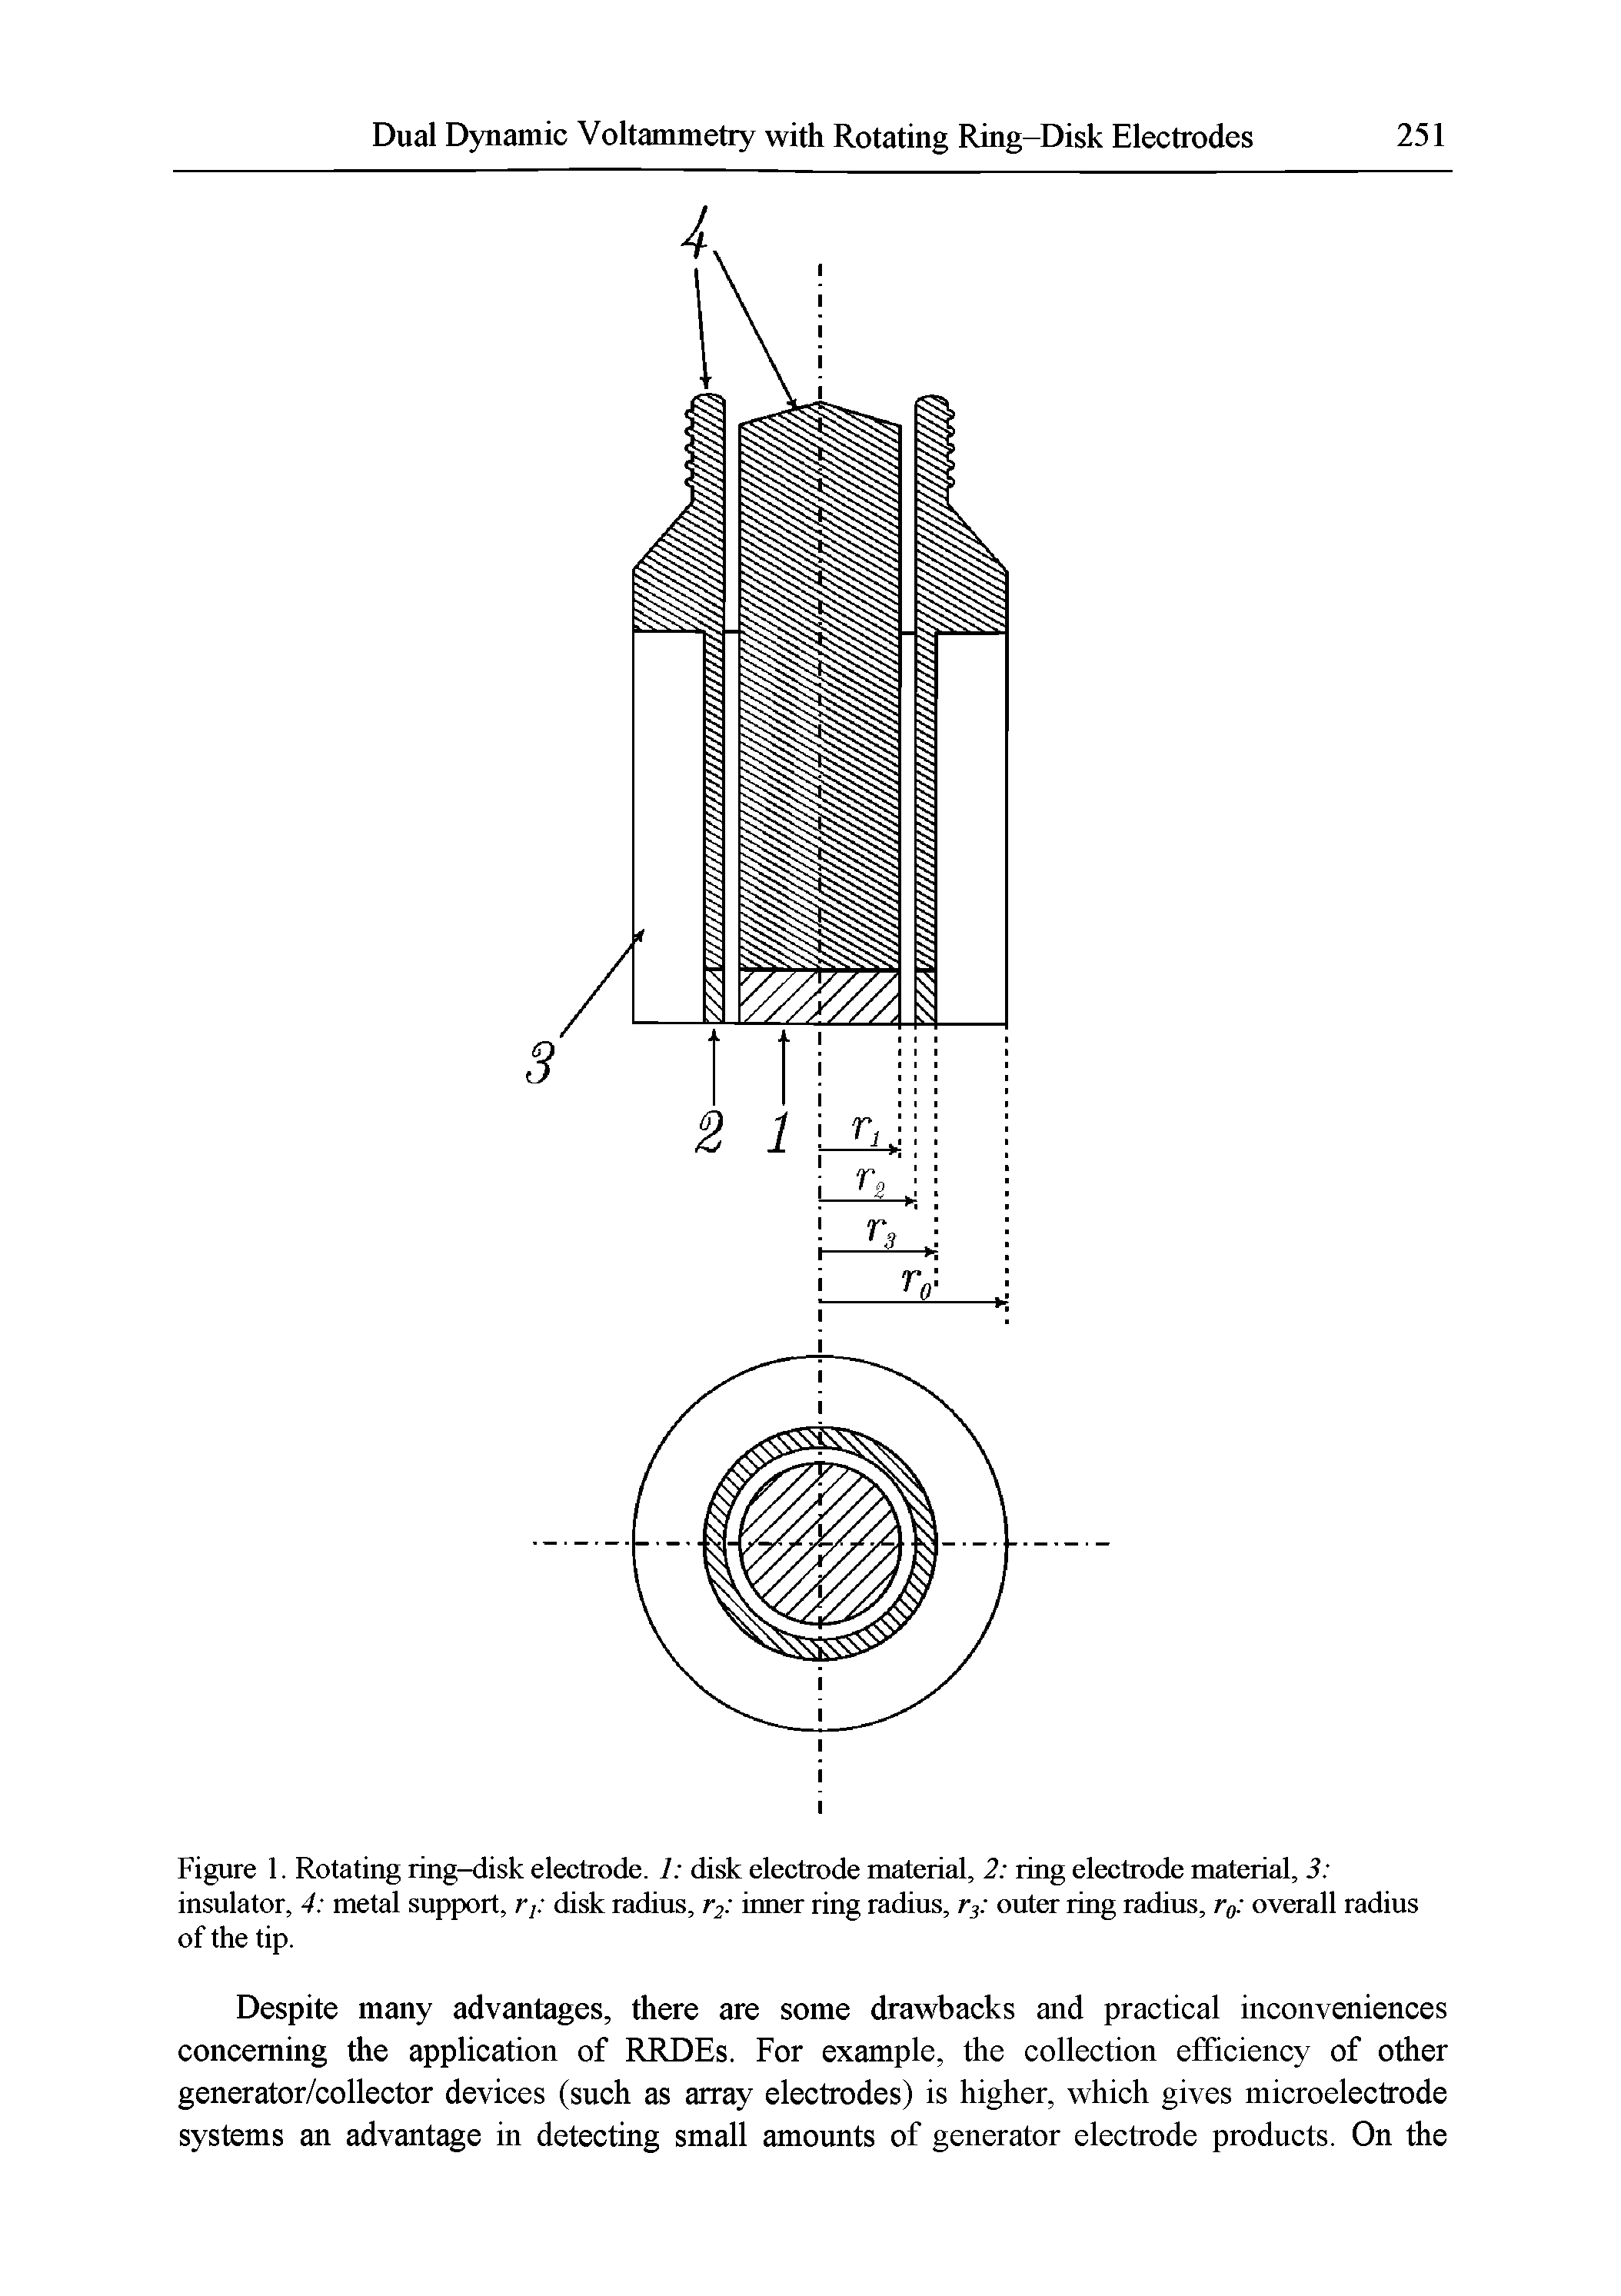 Figure 1. Rotating ring-disk electrode. 1 disk electrode material, 2 ring electrode material, 3 insulator, 4 metal support, r, disk radius, T2 inner ring radius, outer ring radius, r overall radius of the tip.